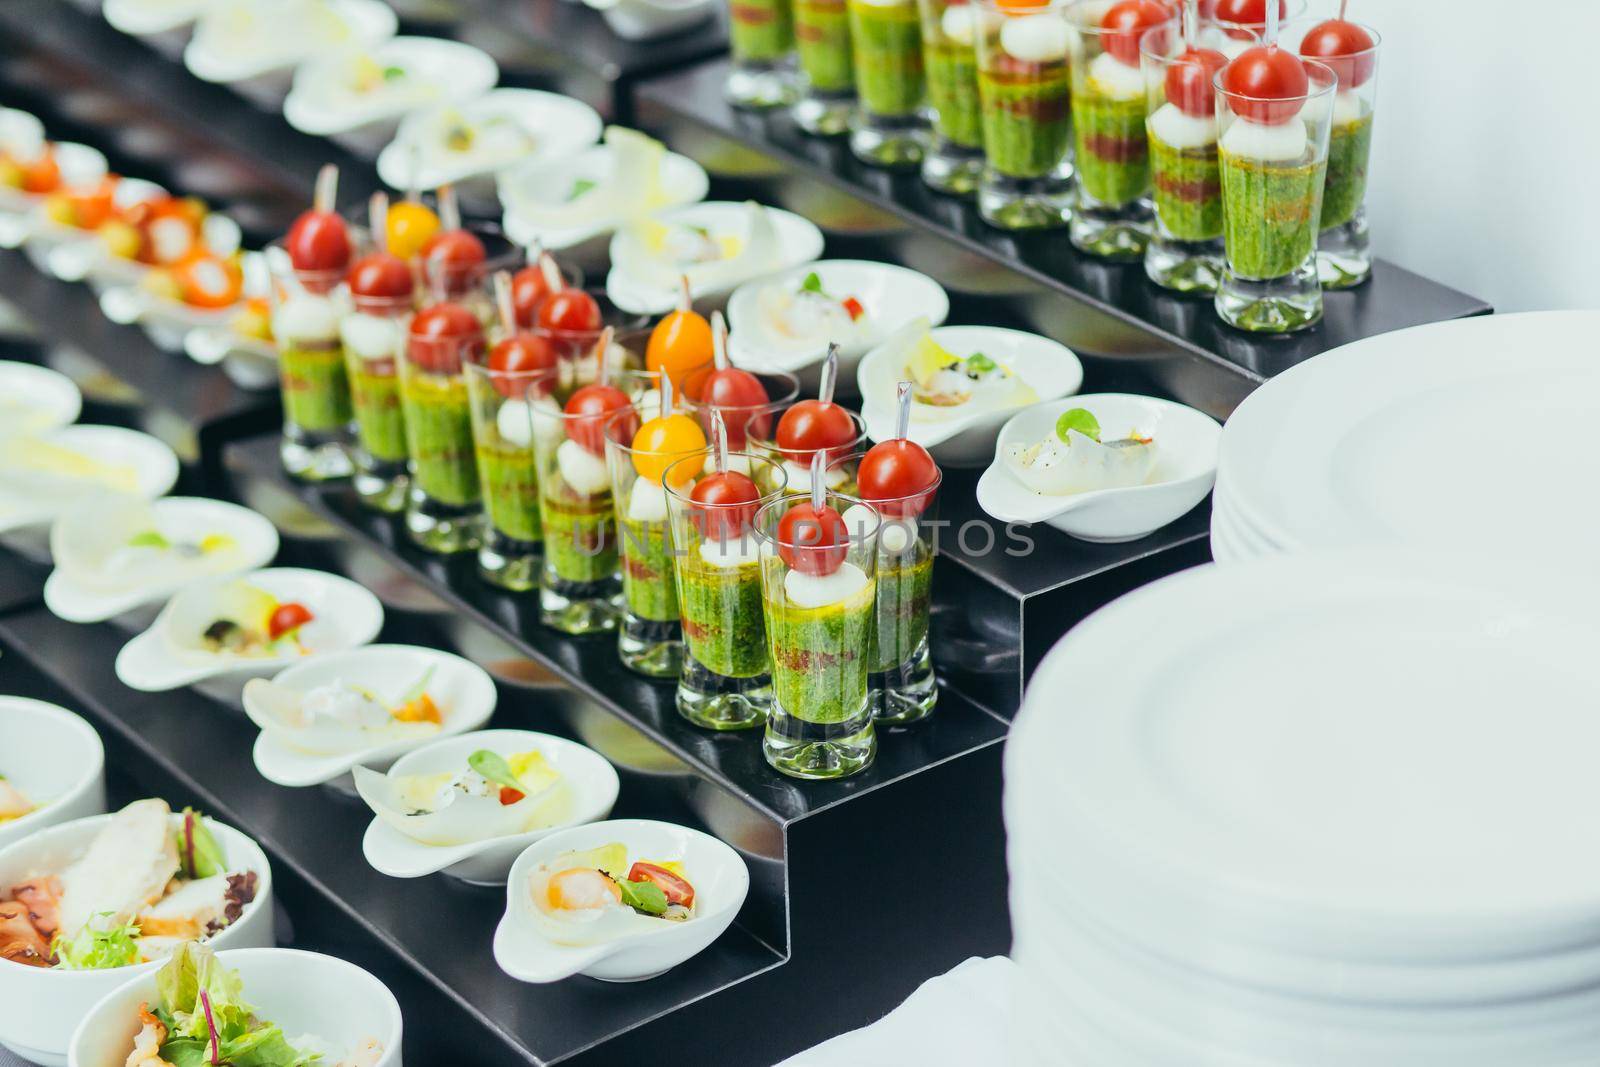 Cold snacks at a conference event